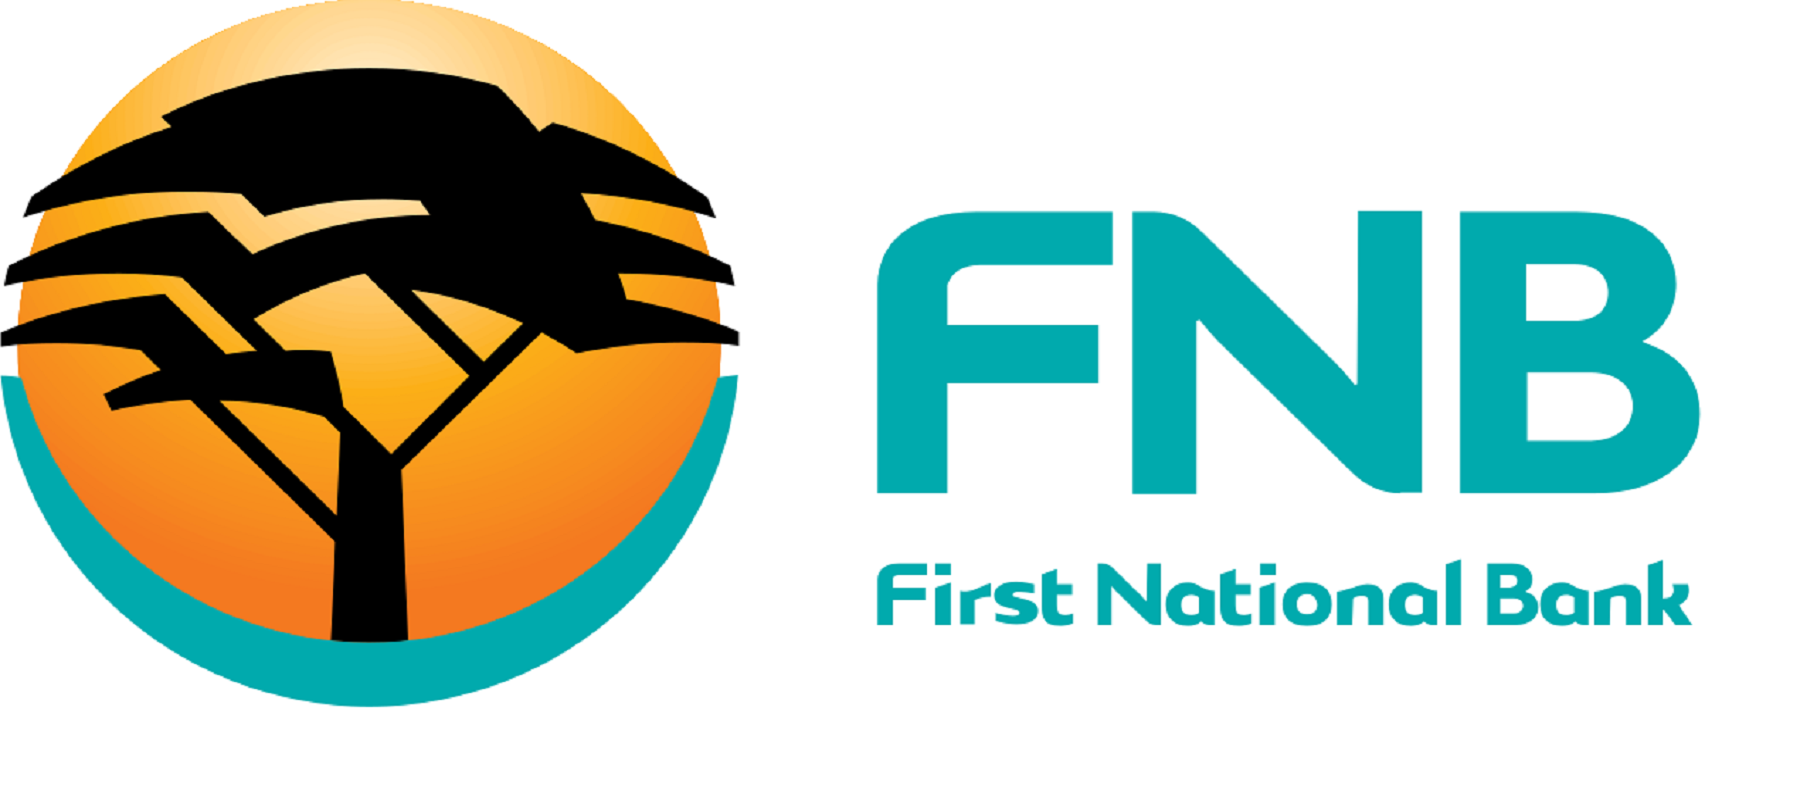 First National Bank is South Africa’s top brand with a brand value of $3.4 billion, report